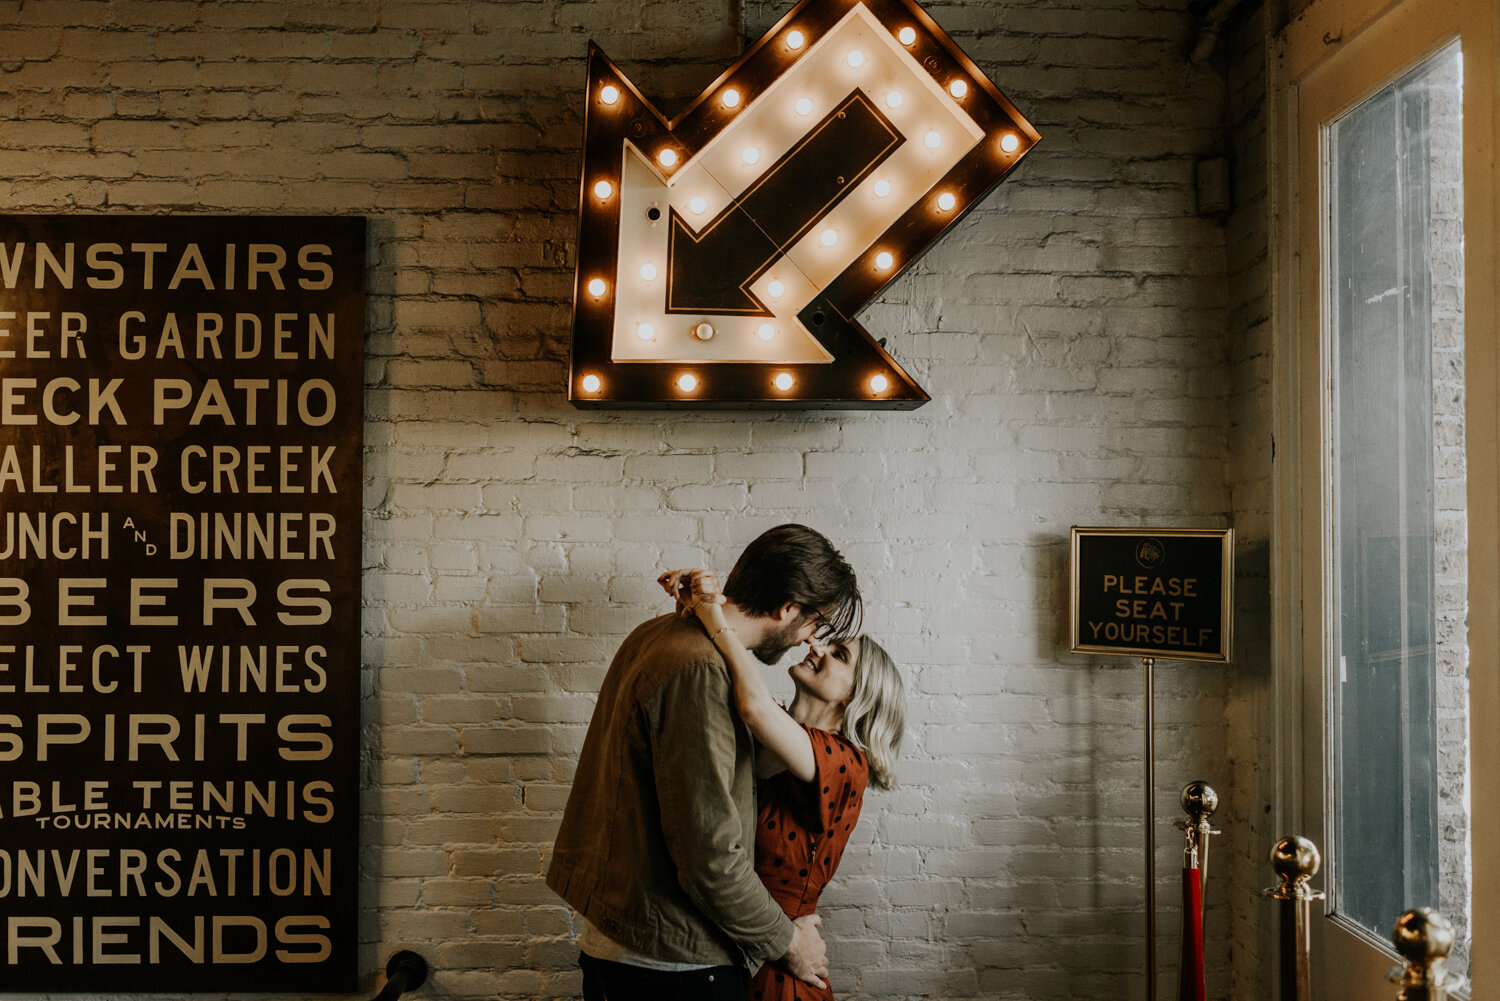 Easy Tiger in Austin, Texas Cute Engagement Photos